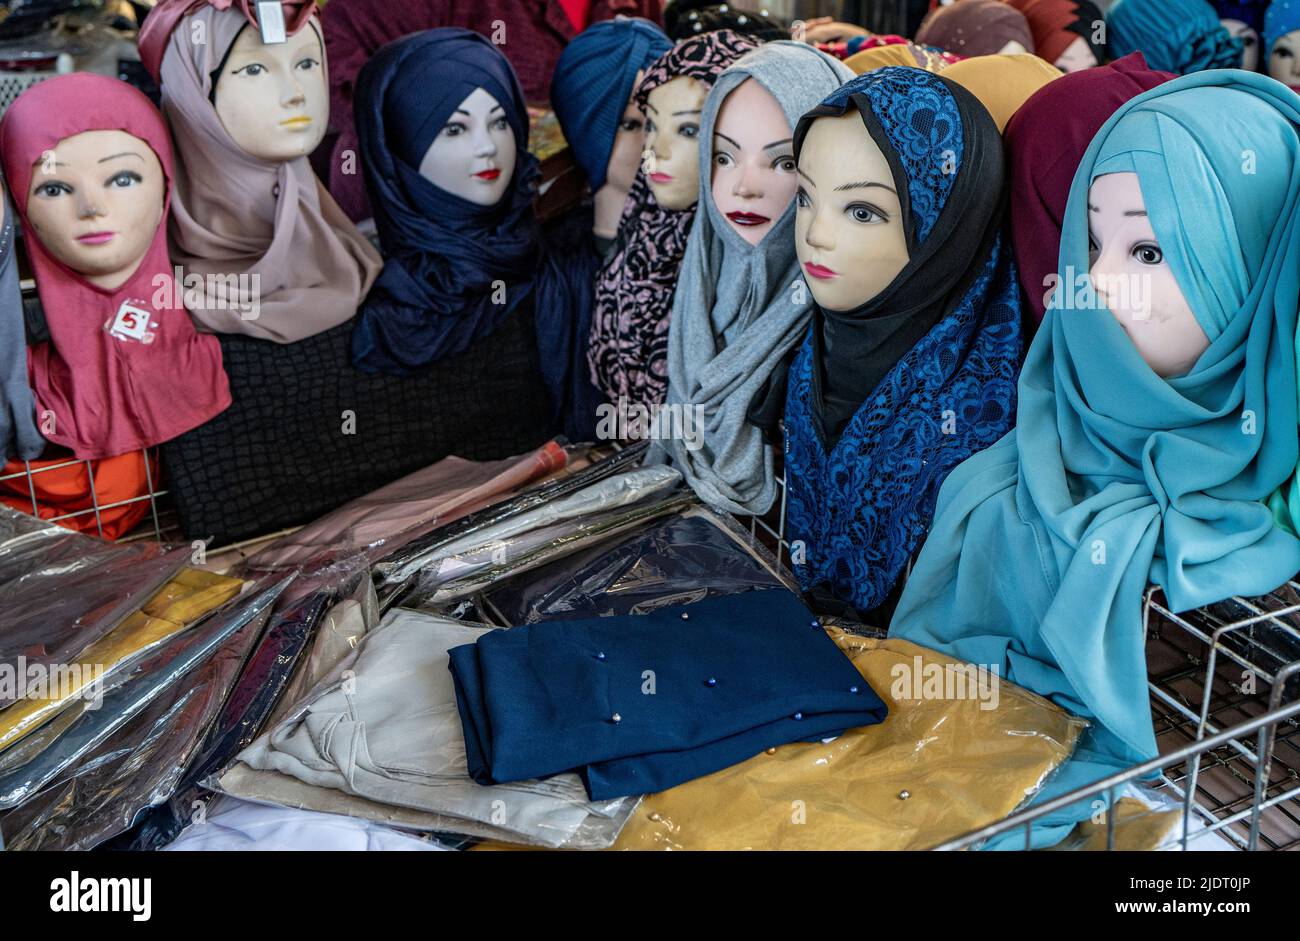 A series of mannequins wearing colorful head scarves or hijabs in a market stall in Turin, Italy Stock Photo